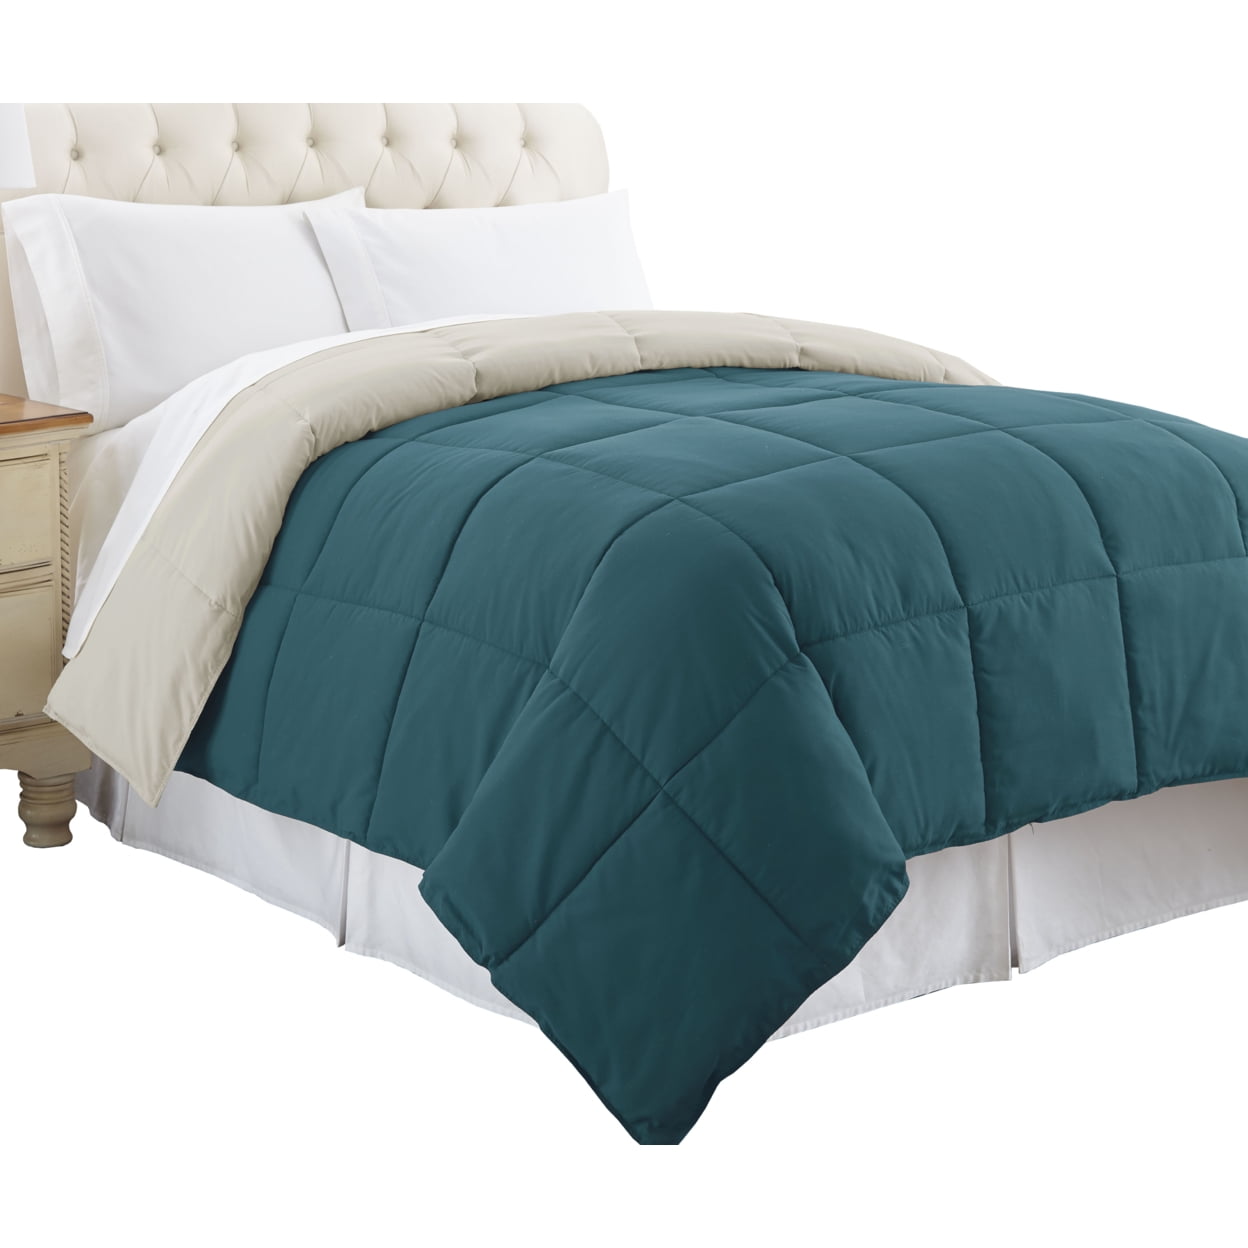 Bm46024 Genoa Twin Size Box Quilted Reversible Comforter, Blue & Gray